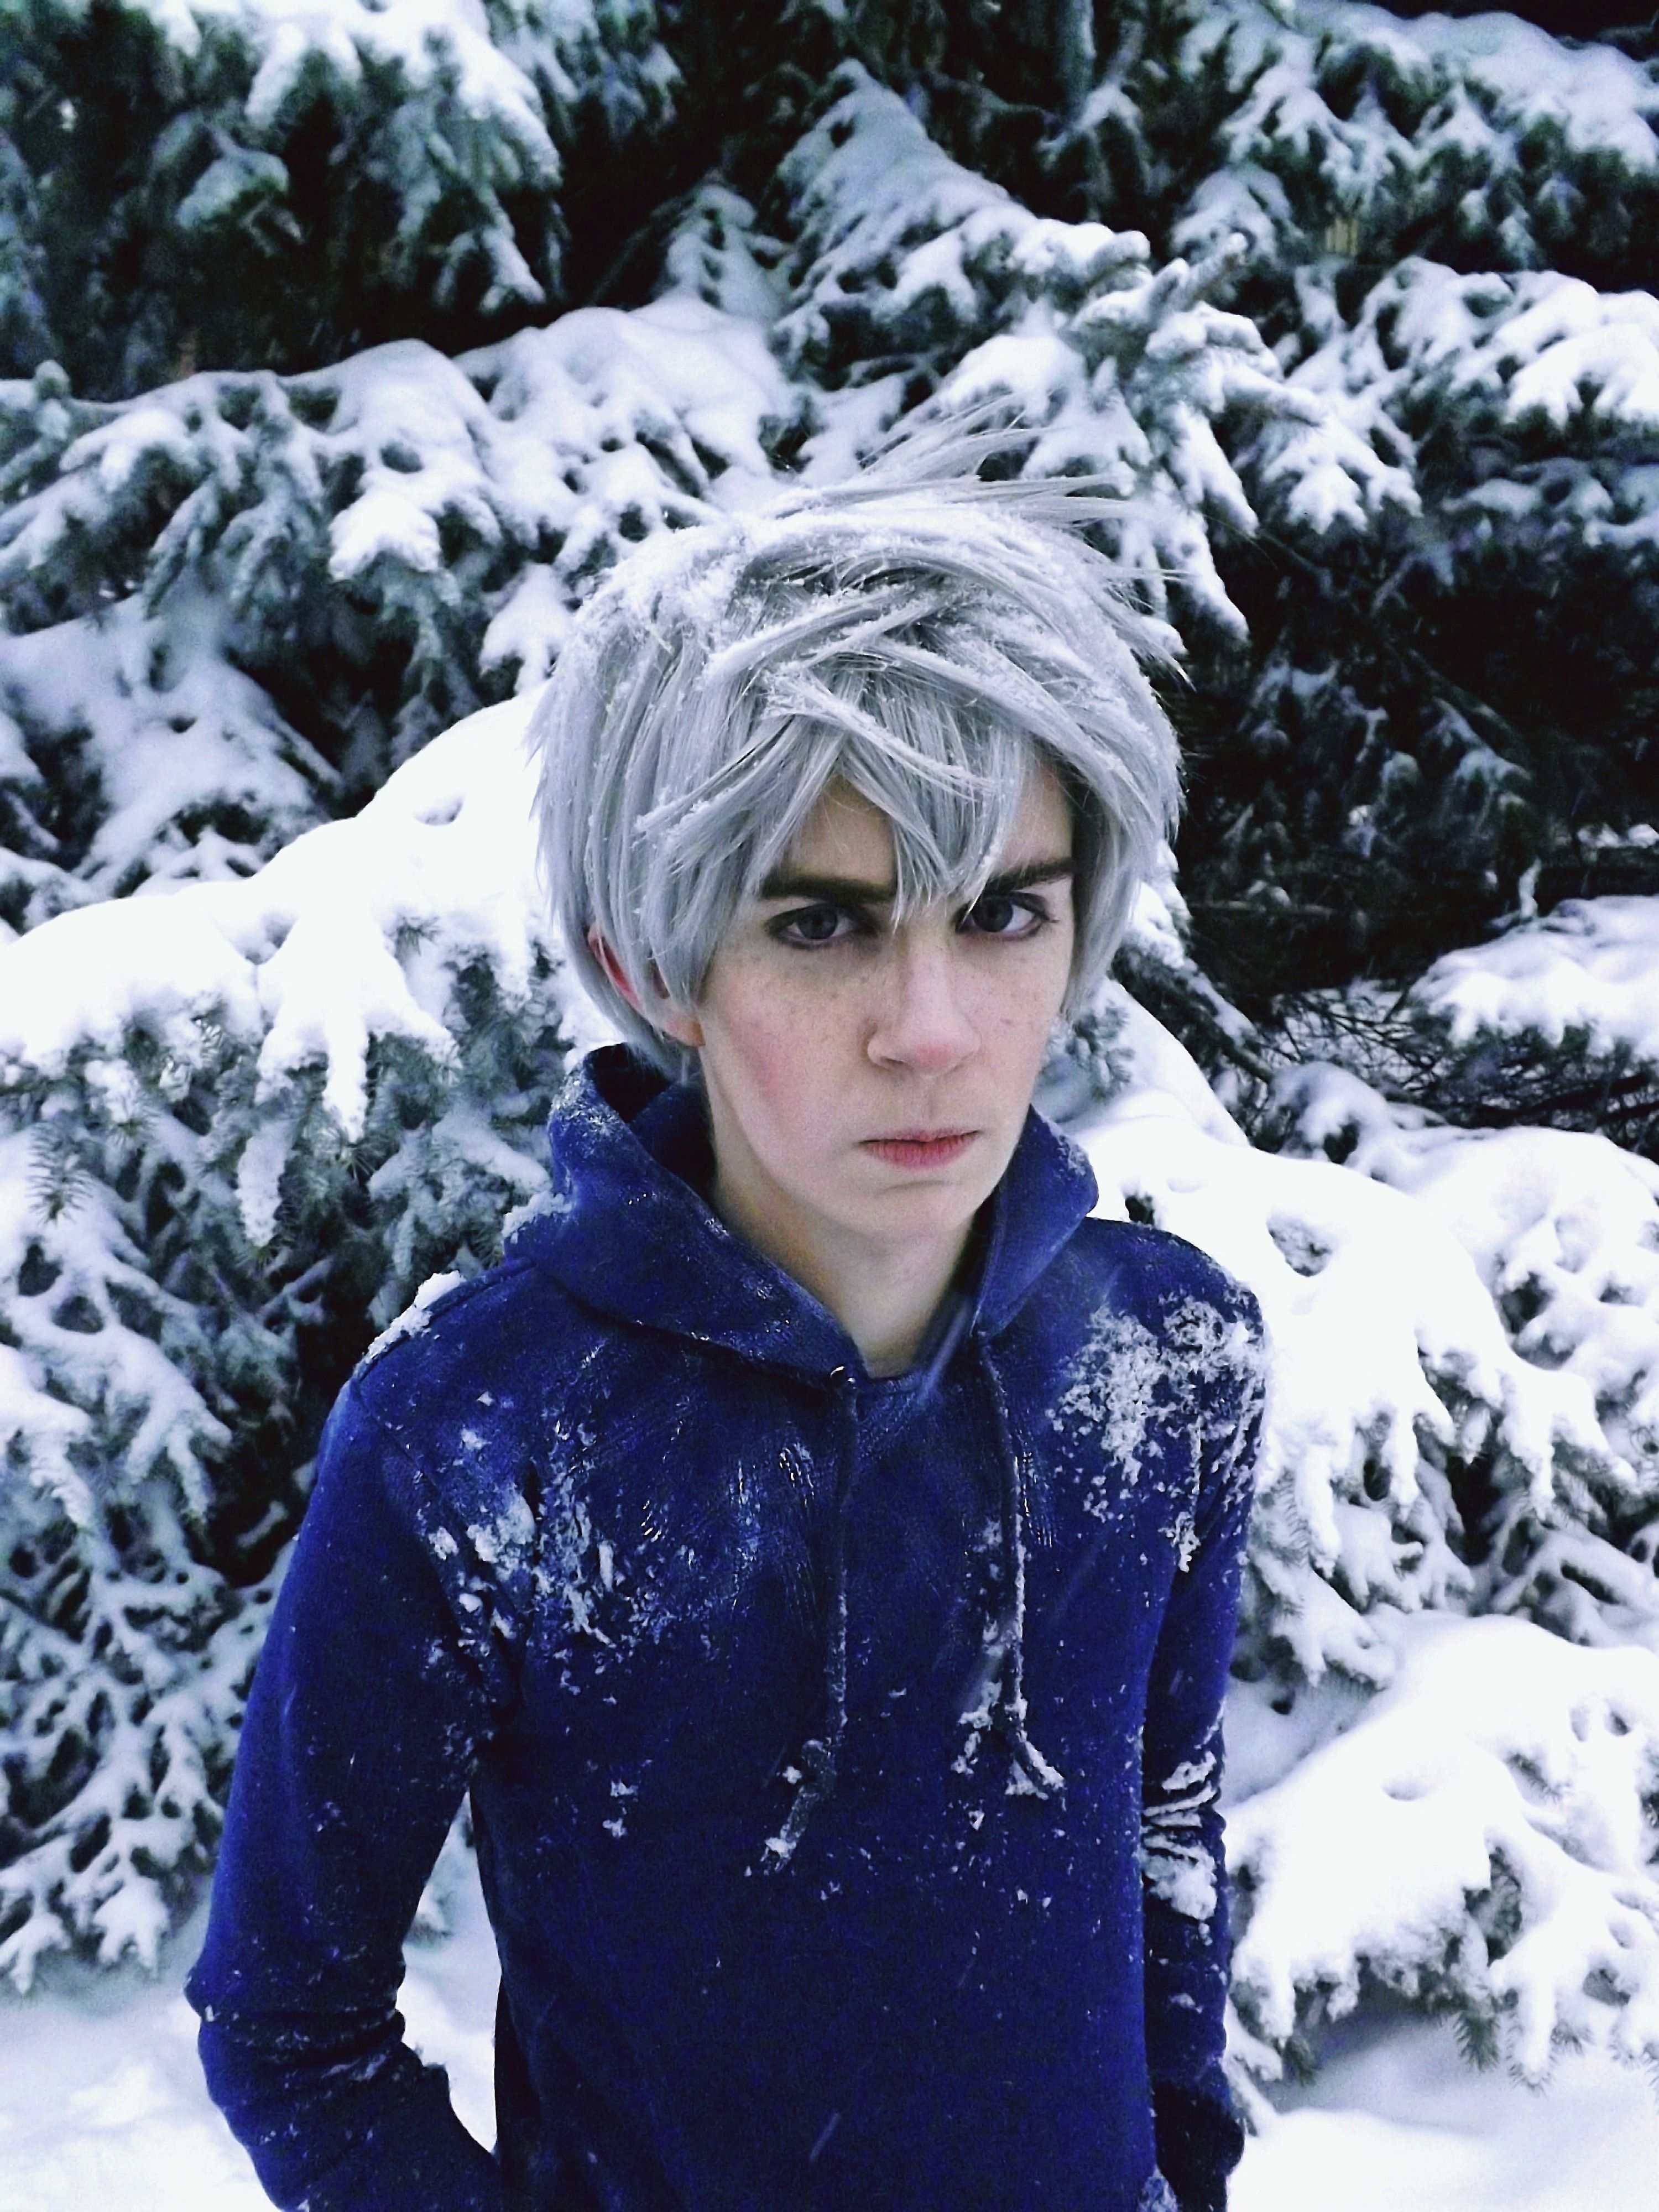 Jack Frost From Rise Of The Guardians January 2018 Rotg